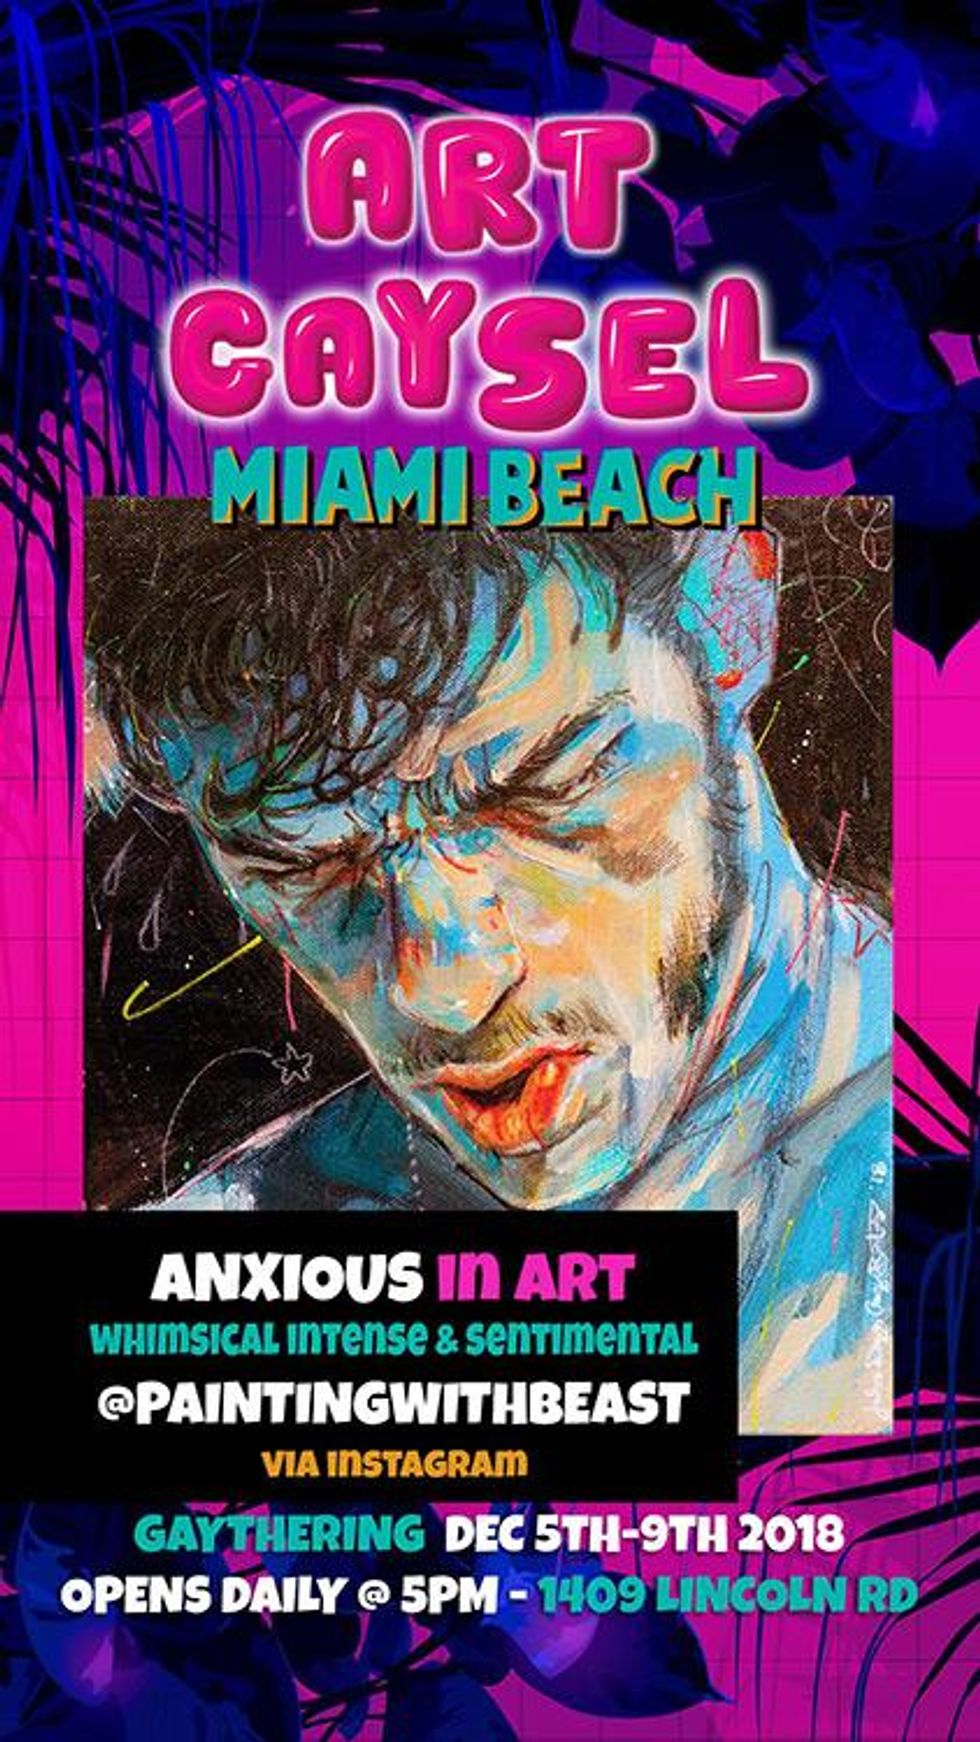 30+ Gay Artists On Display at Art Gaysel in Miami Beach